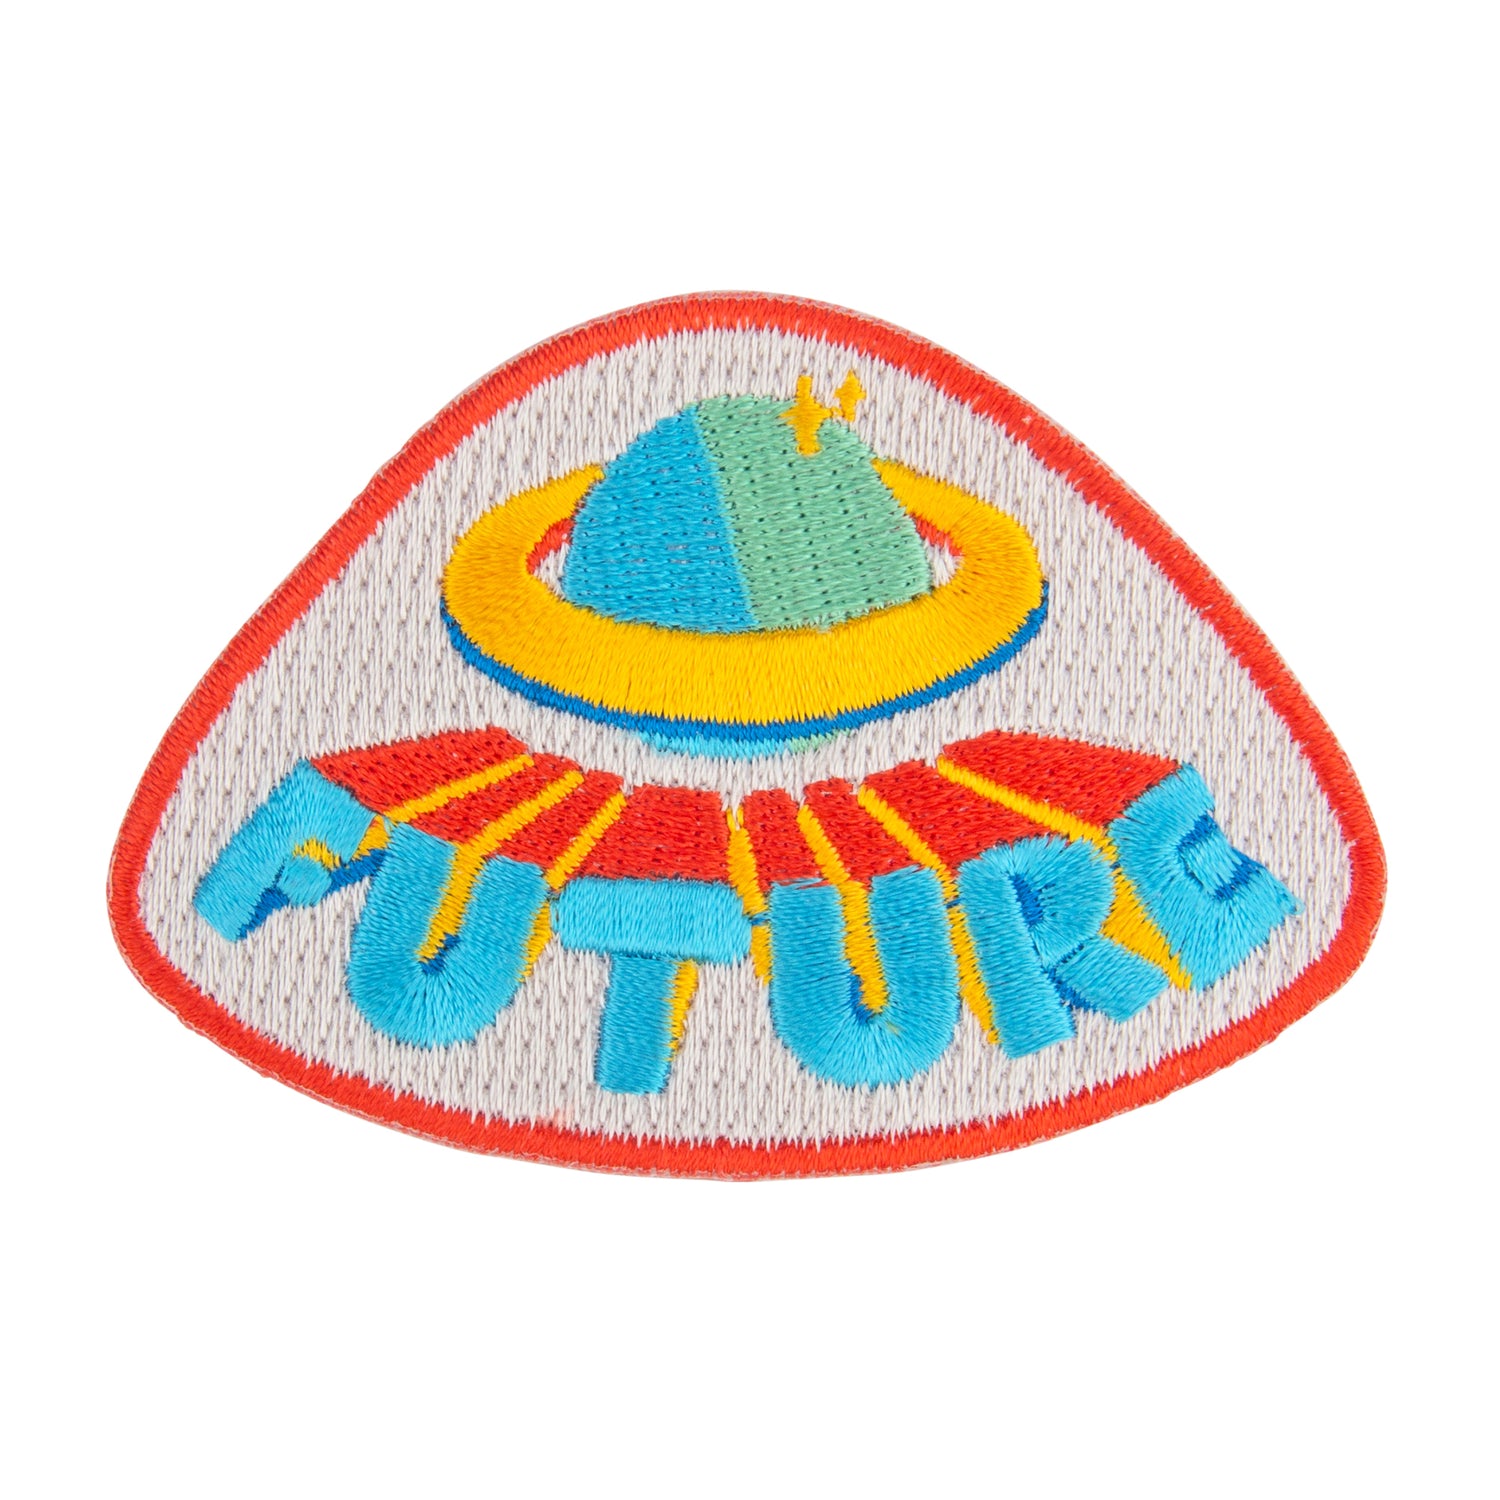 Future Space Patch